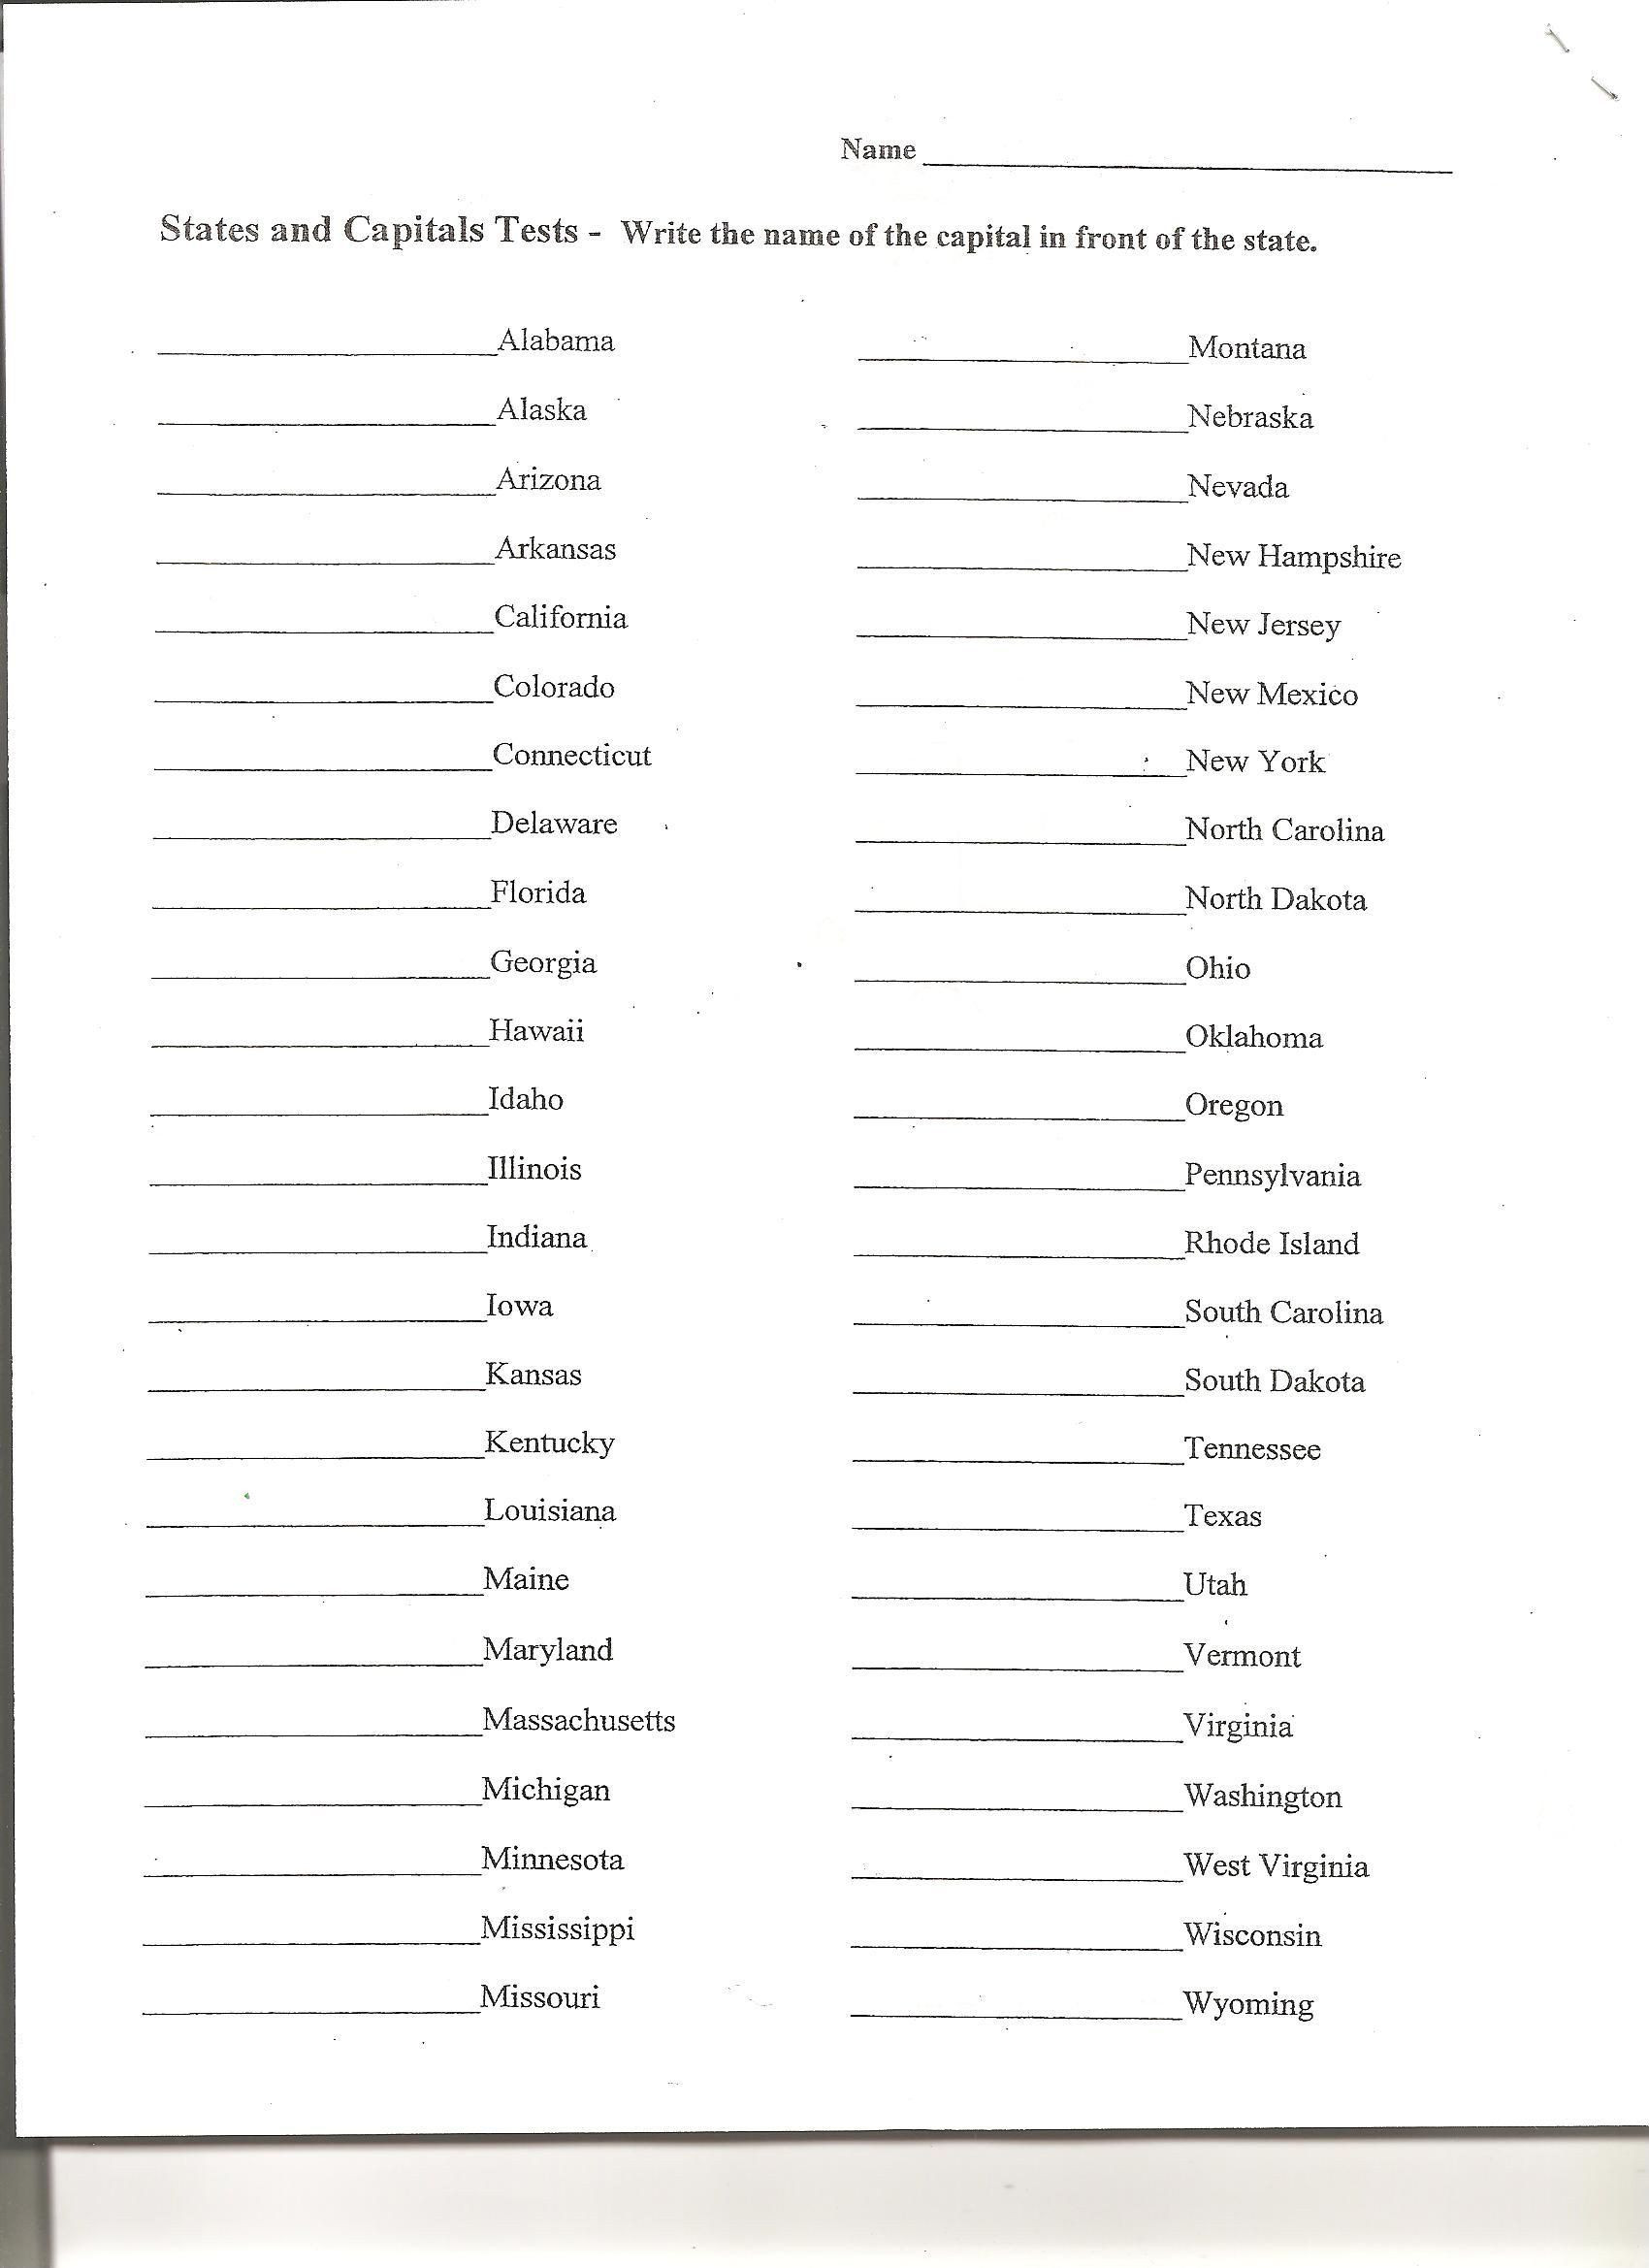 States and Capitals Matching Worksheet Pin On Printable Blank Worksheet Template